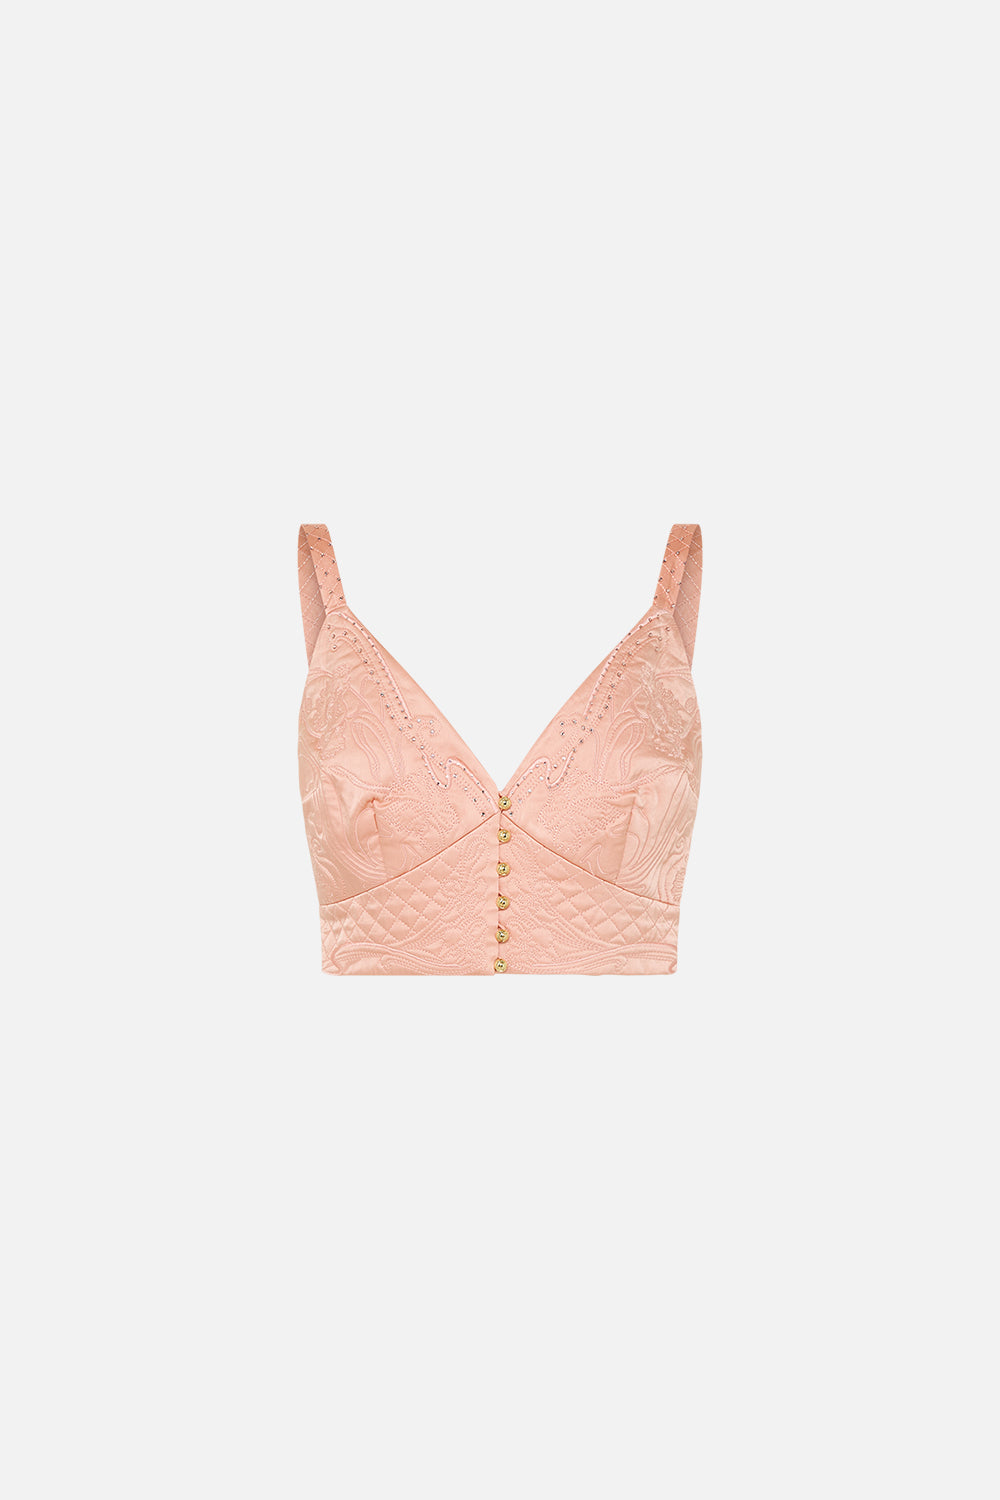 CAMILLA pink blush quilted bralette in Blossoms And Brushstrokes print.